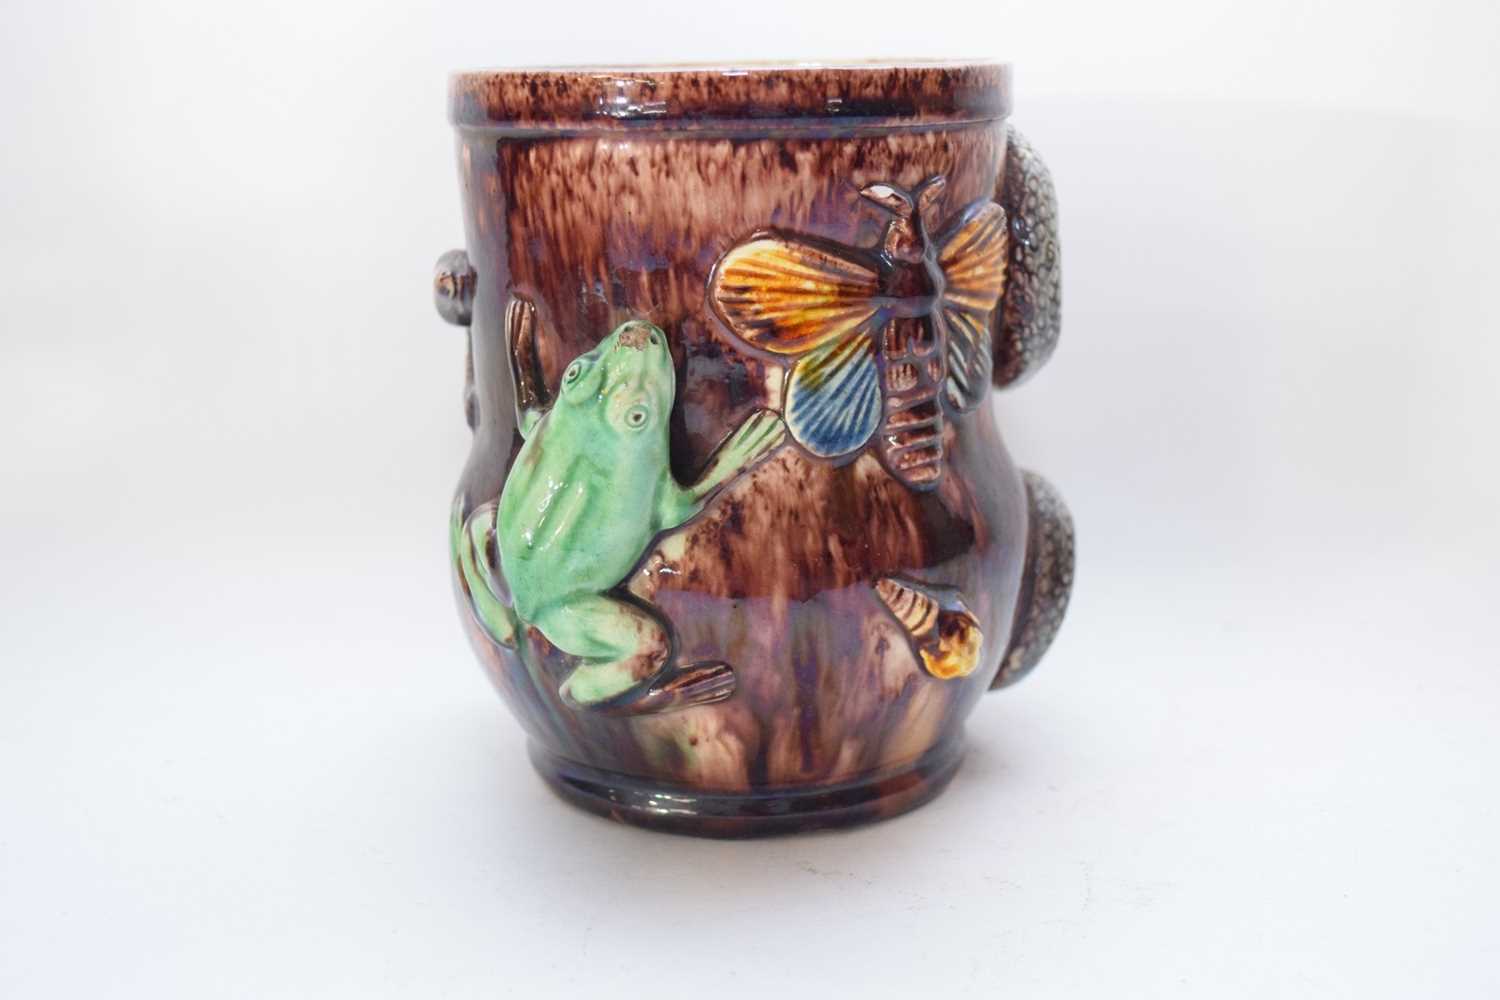 Continental majolica style vase modelled in relief with a green frog, insects and a snake in